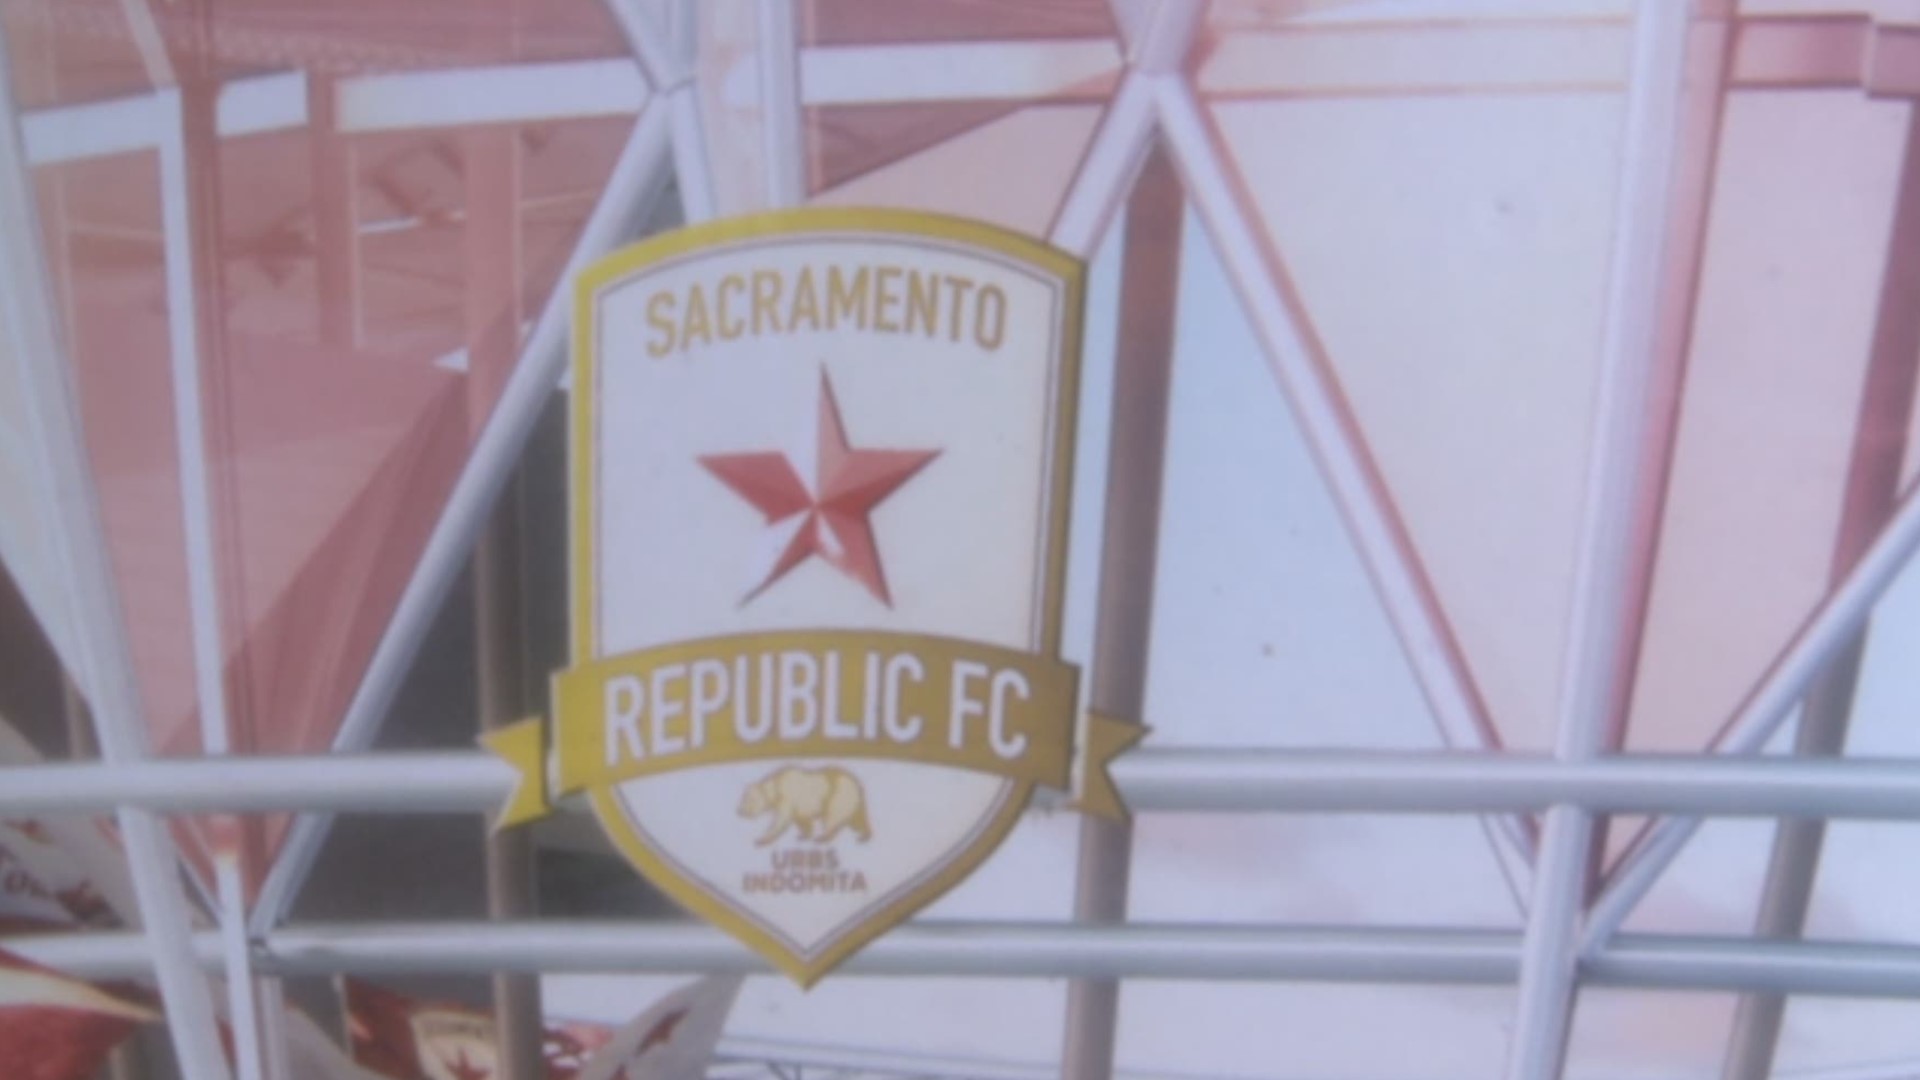 ABC10's Lina Washington provides an update on Sacramento Republic FC's push for Major League Soccer and the billionaire investor joining in team ownership.